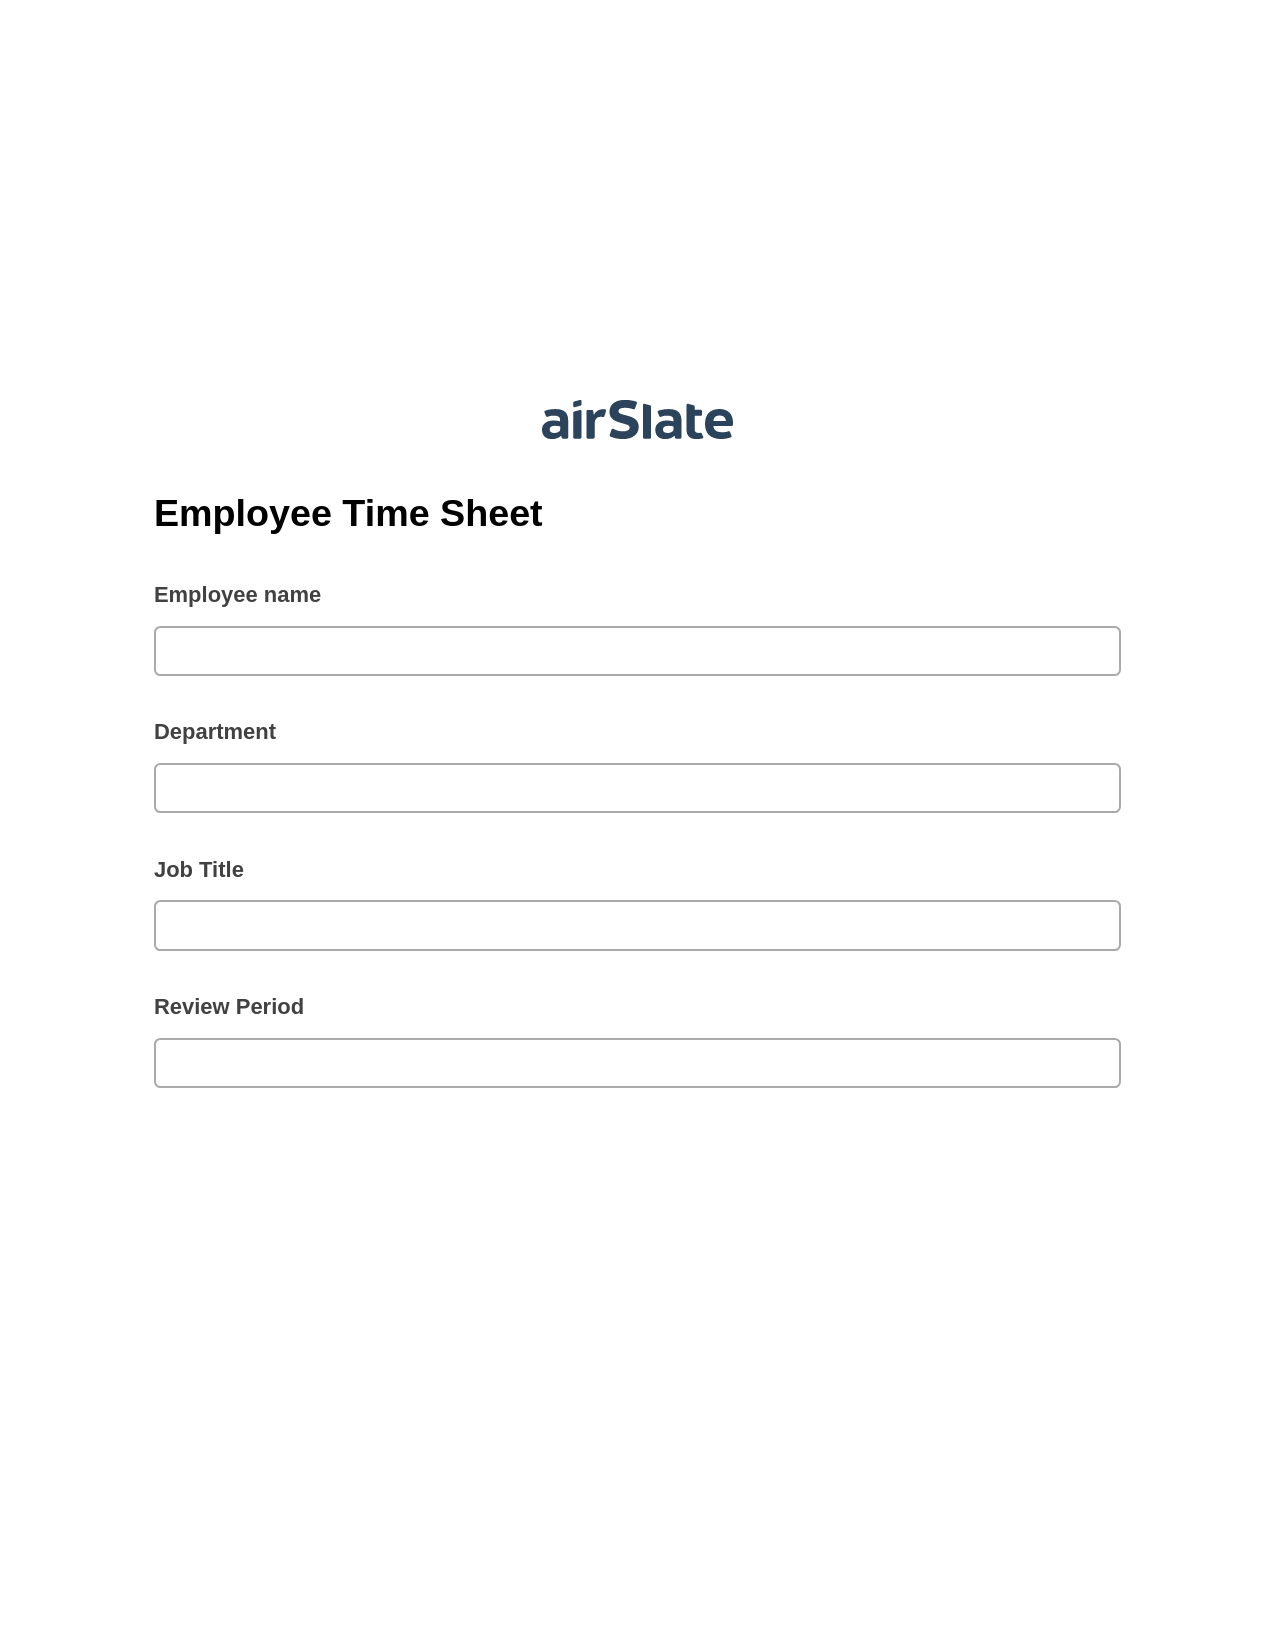 Employee Time Sheet Pre-fill Document Bot, Create slate addon, Archive to OneDrive Bot